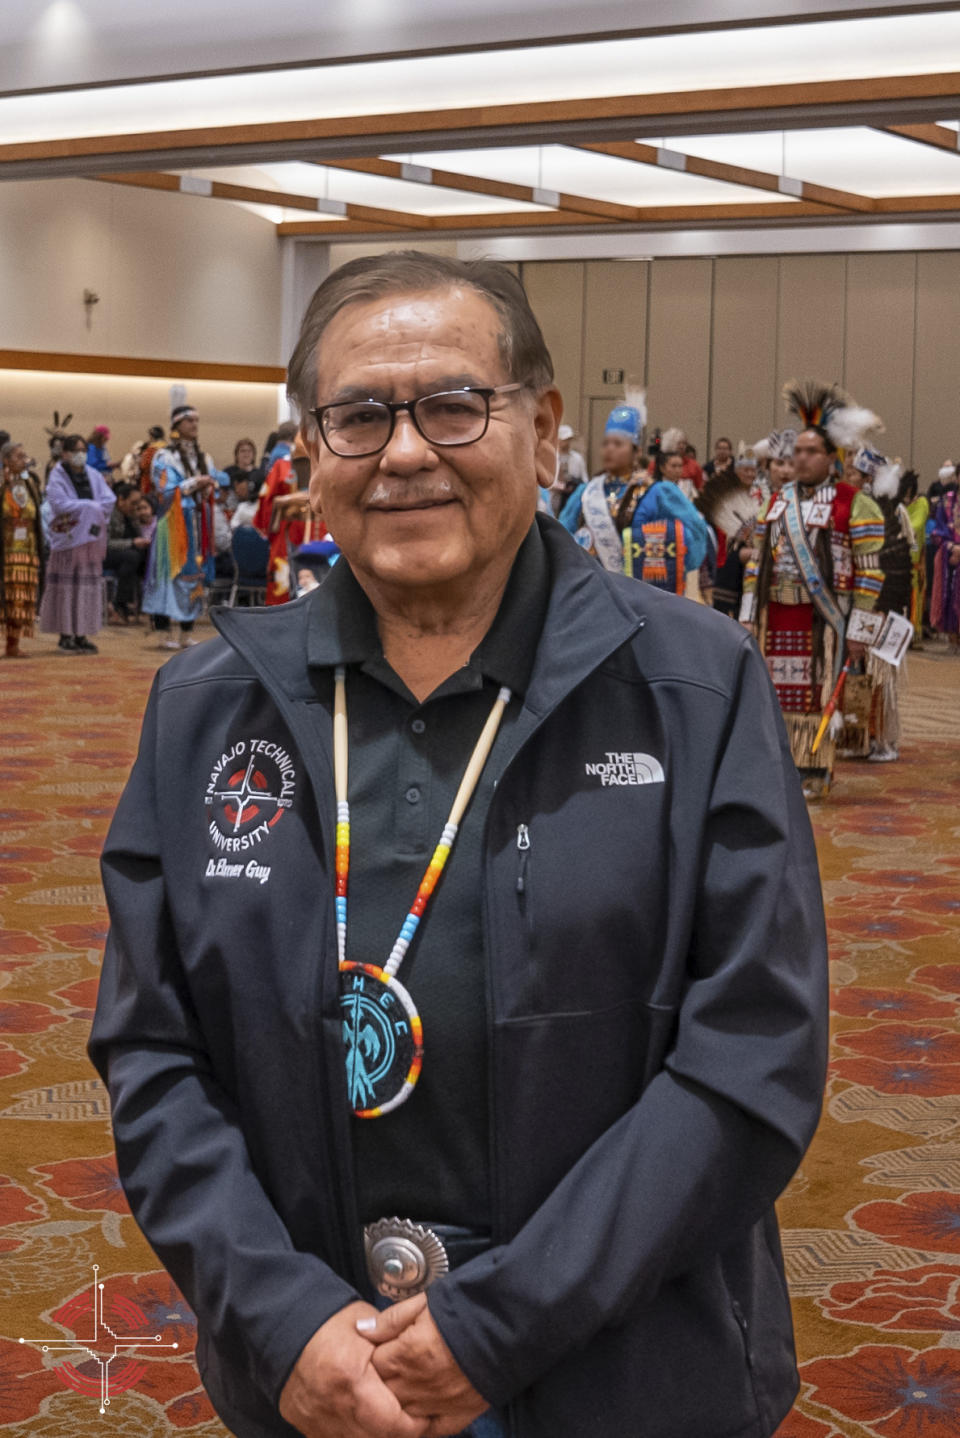 In this photo provided by Navajo Technical University, university President Elmer Guy poses during a higher education conference in Albuquerque, N.M., March 8, 2023. On Friday, March 24, 2023, school officials said the creation of a doctoral program focused on Dine culture and language marks a milestone for the university and is the first doctoral program among tribal colleges and universities in the United States. (Wafa Hozien/Navajo Technical University via AP)